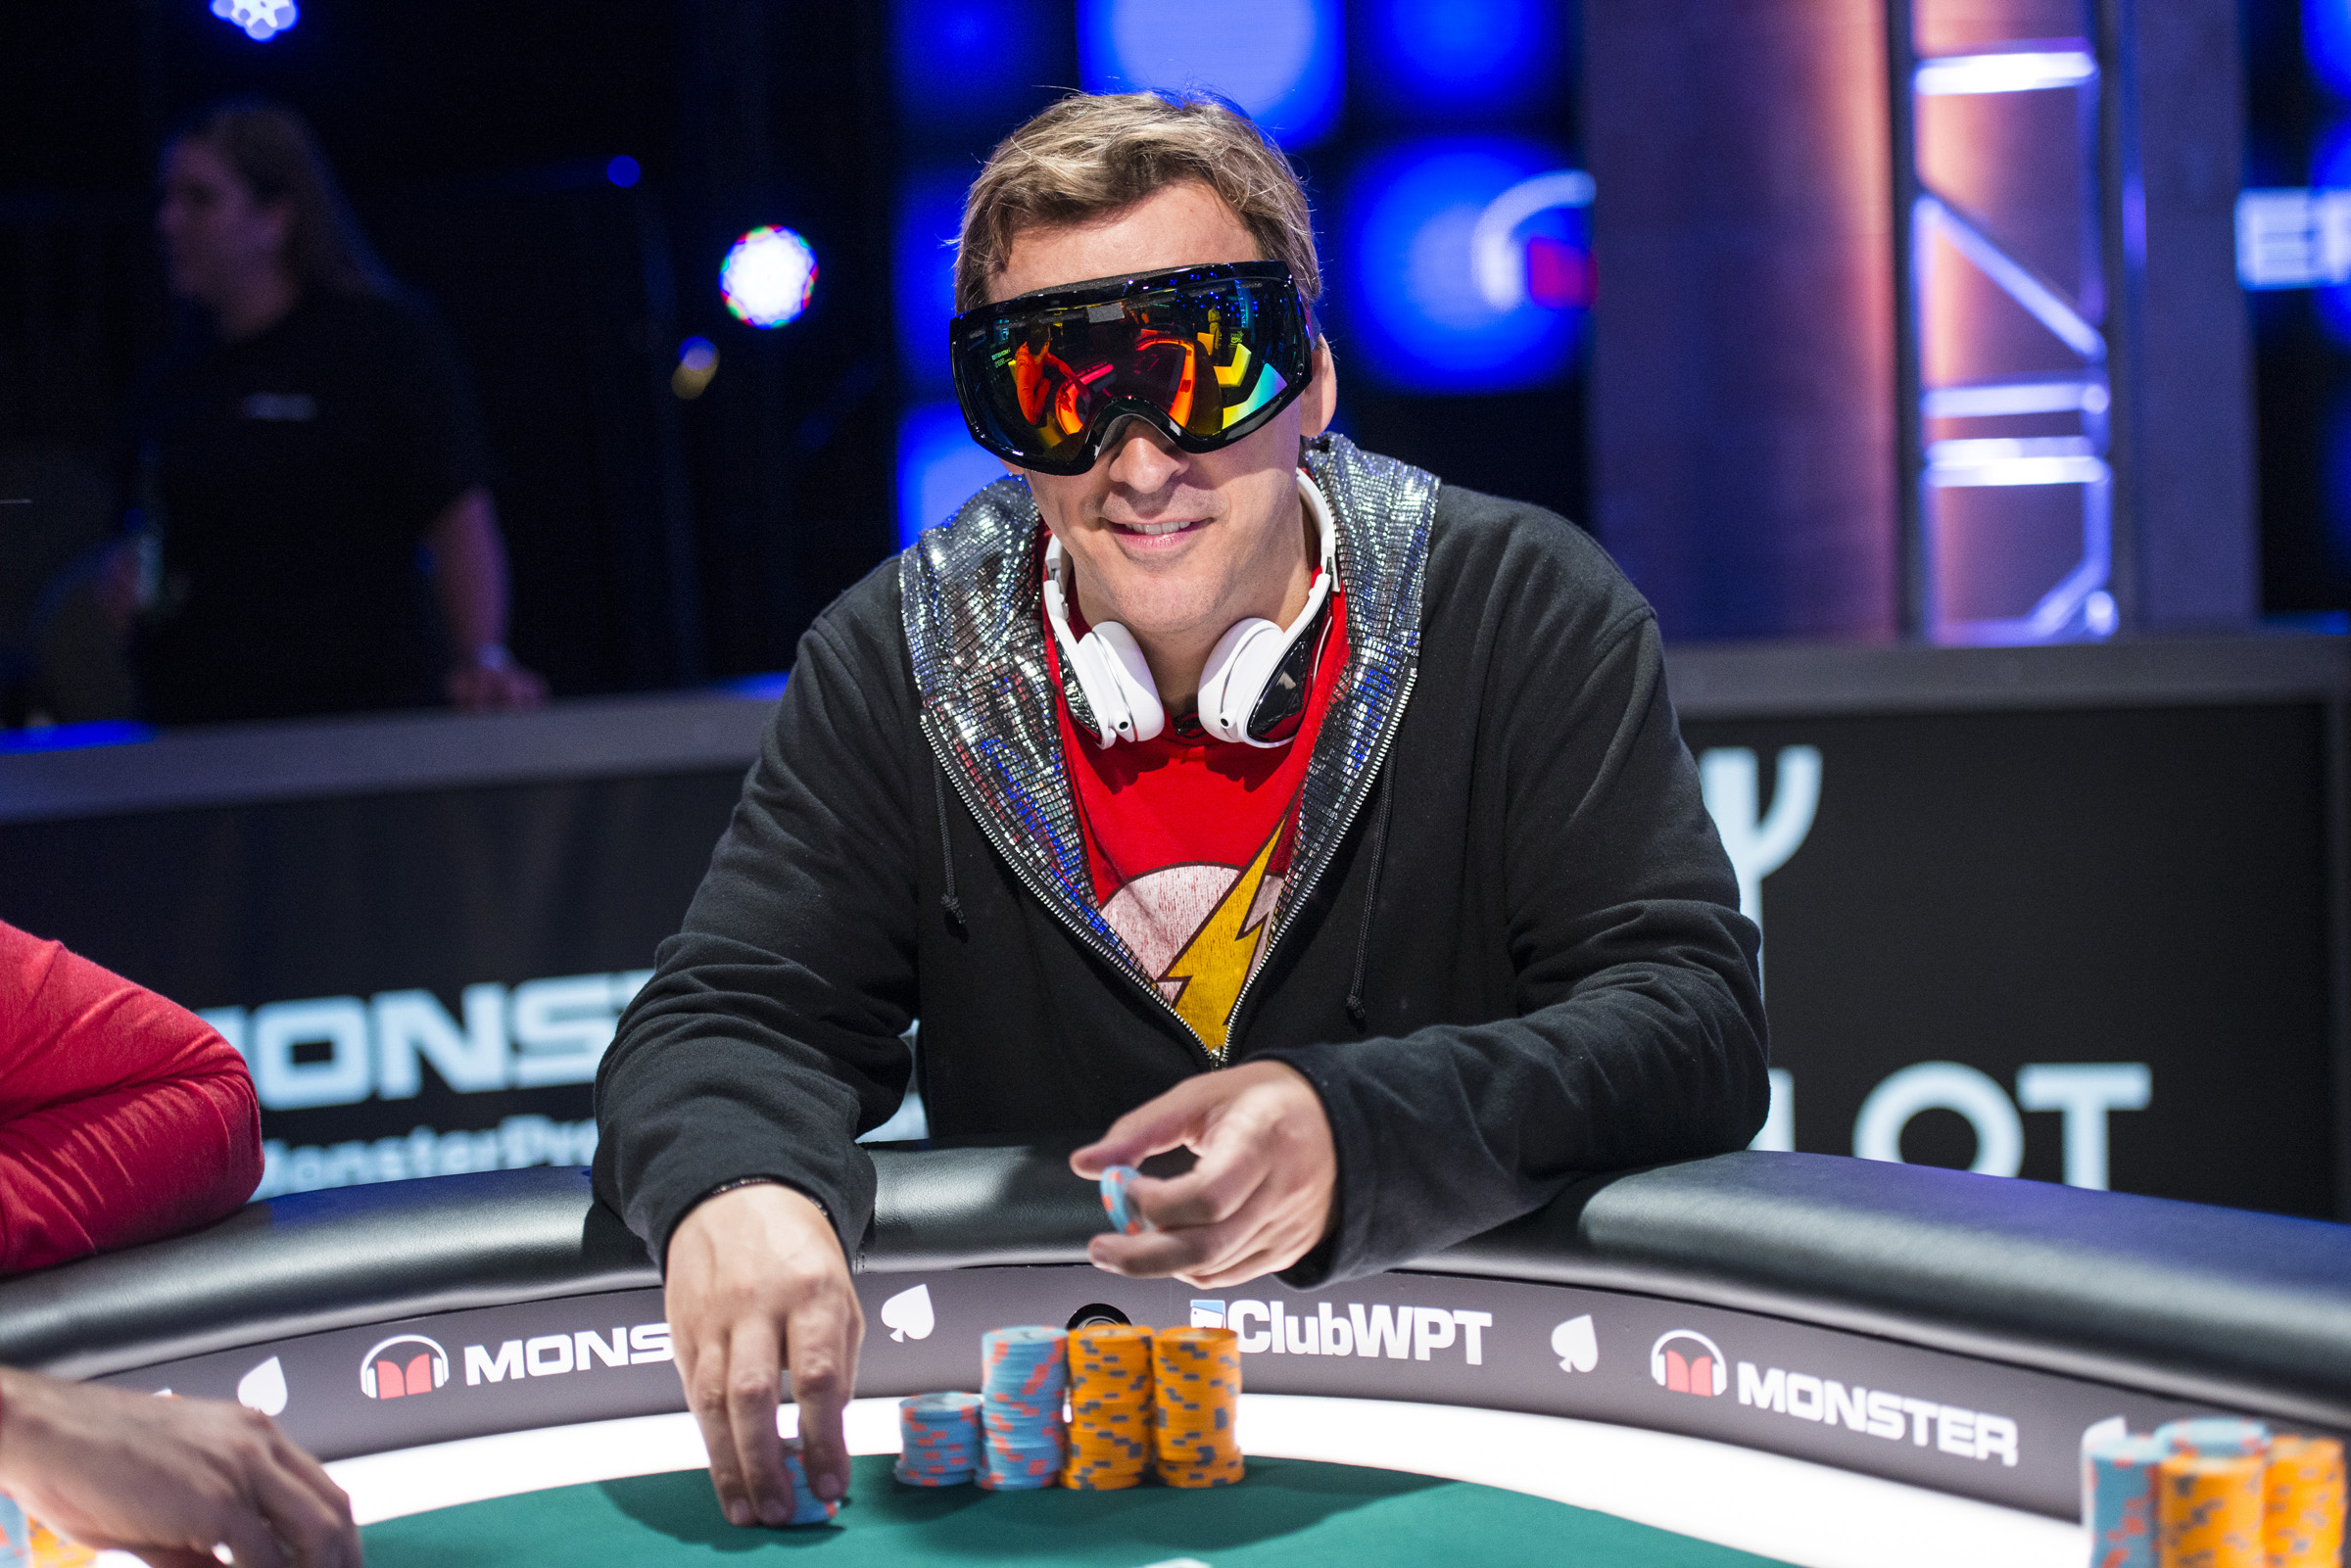 Heart-to-heart: Phil Laak, the great poker eccentric